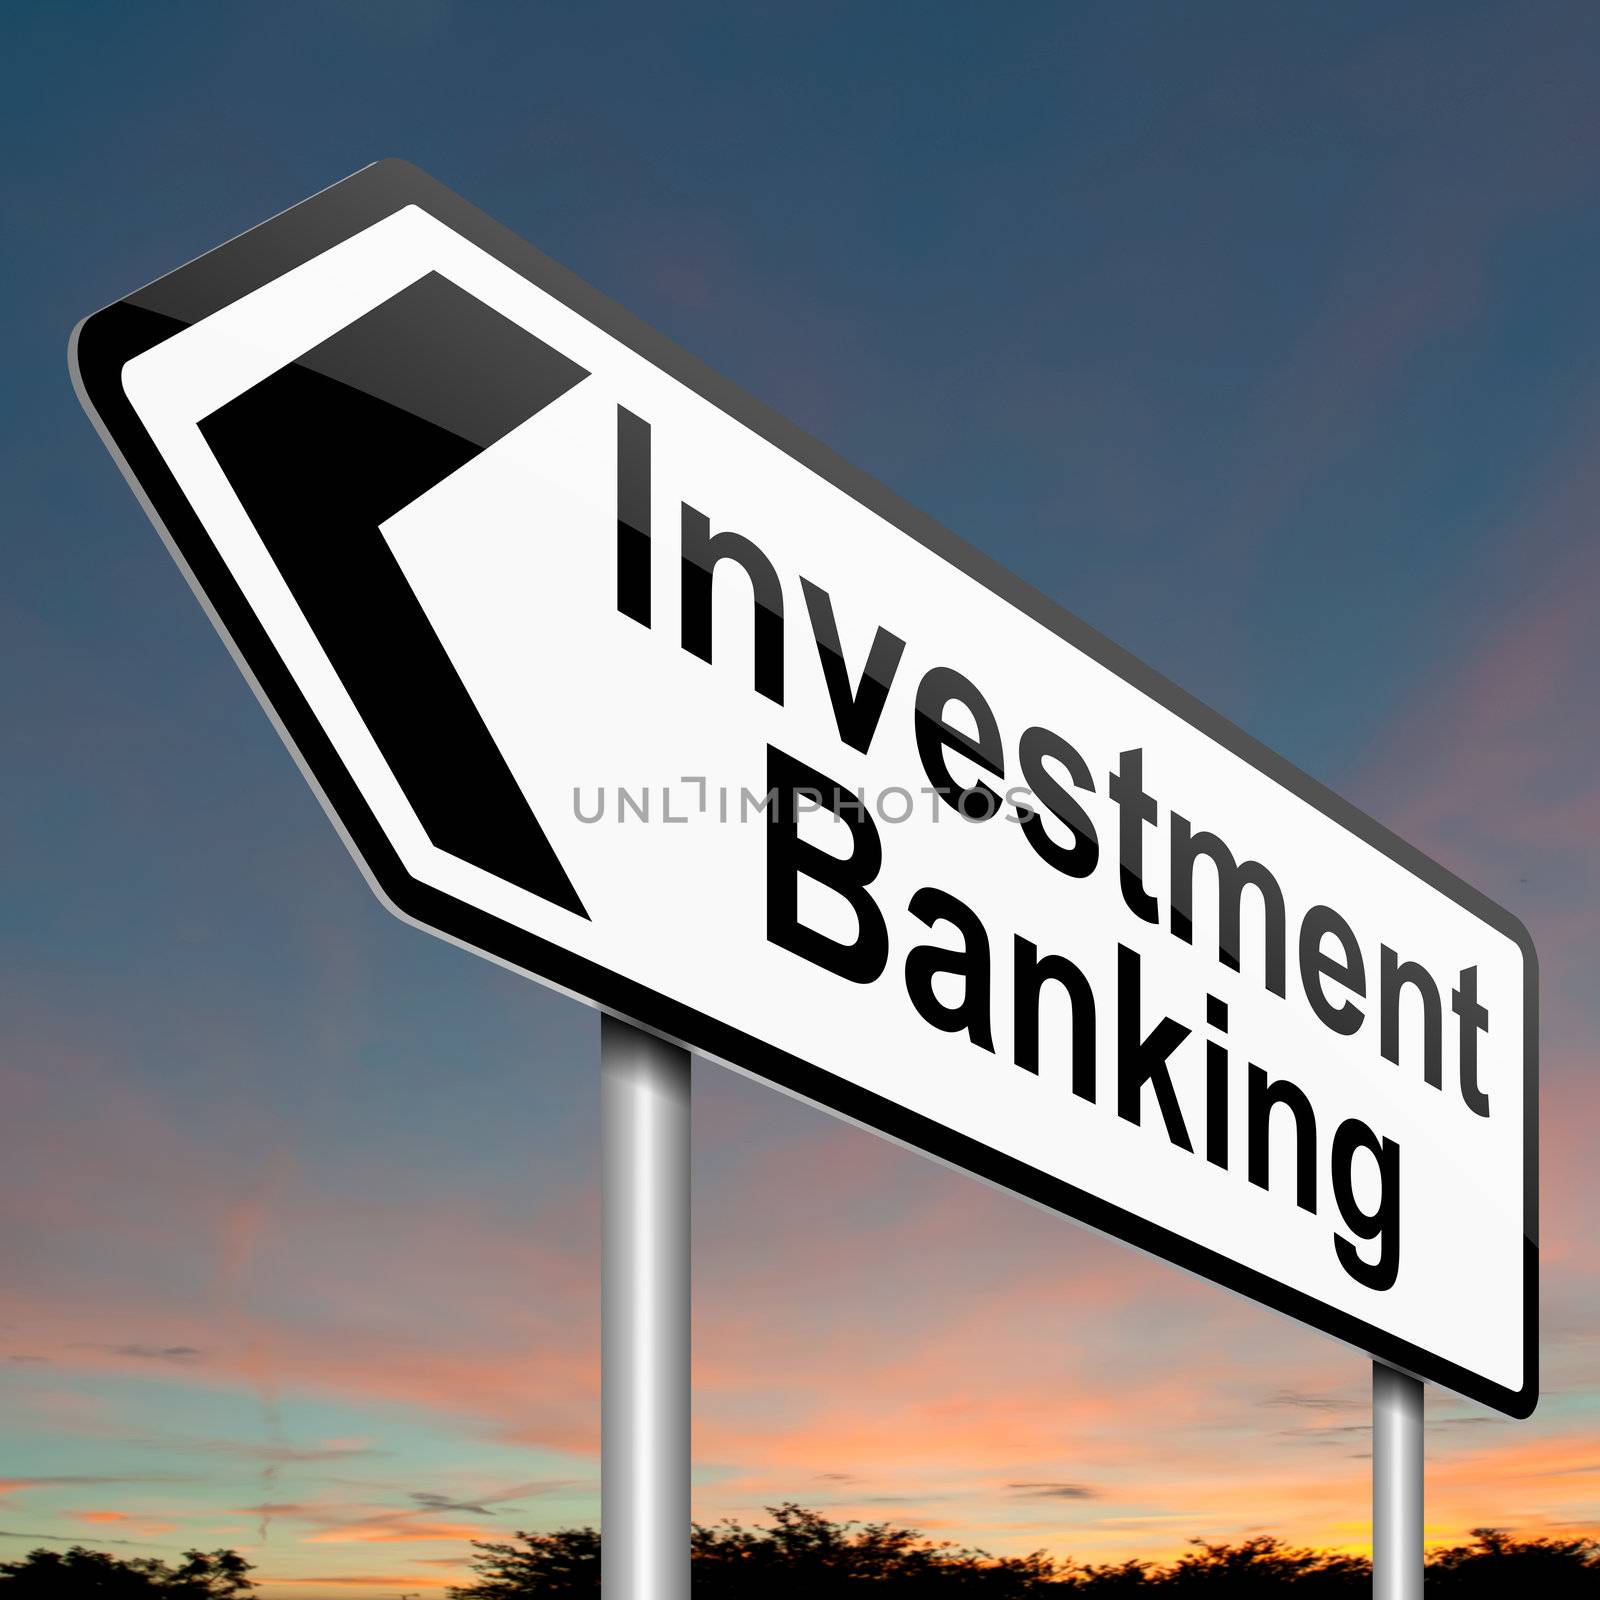 Illustration depicting a sign with an investment banking concept.